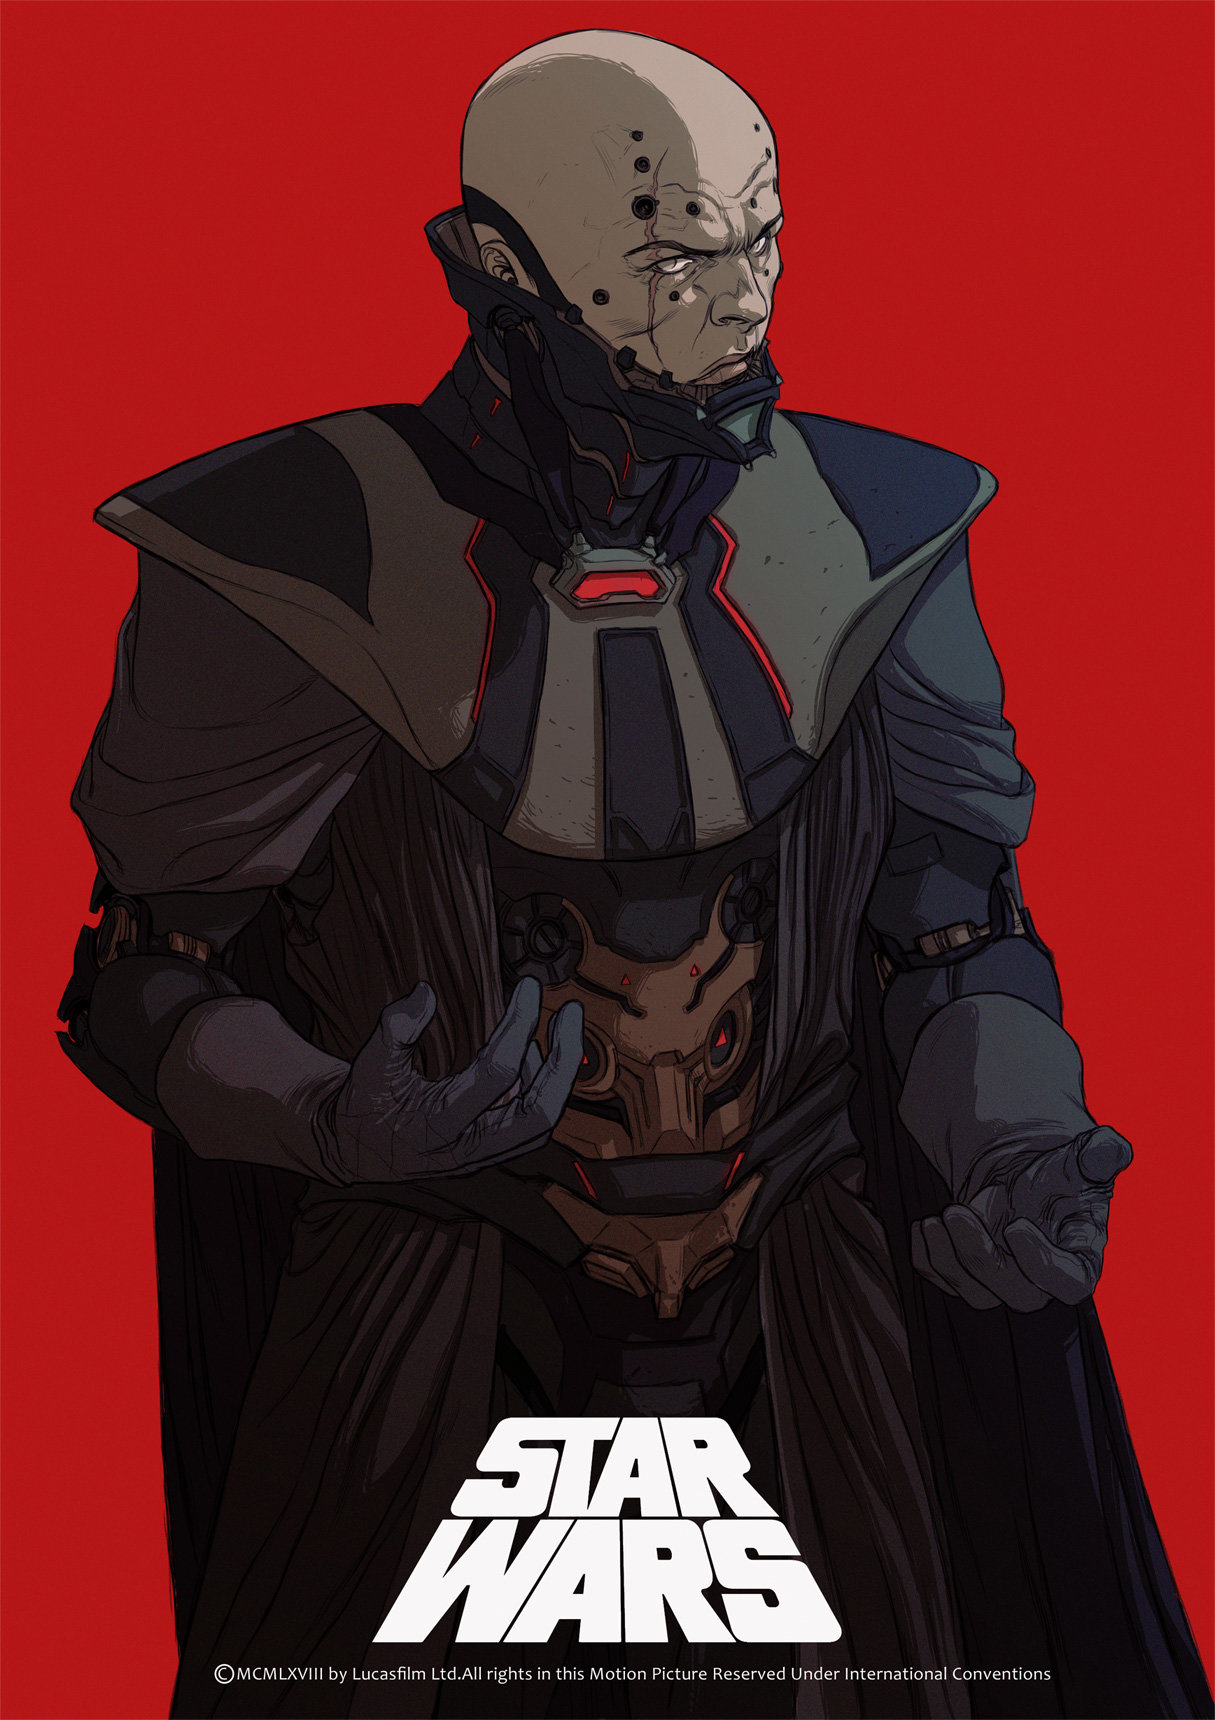 Fine Art: A Very Cool Darth Vader Redesign